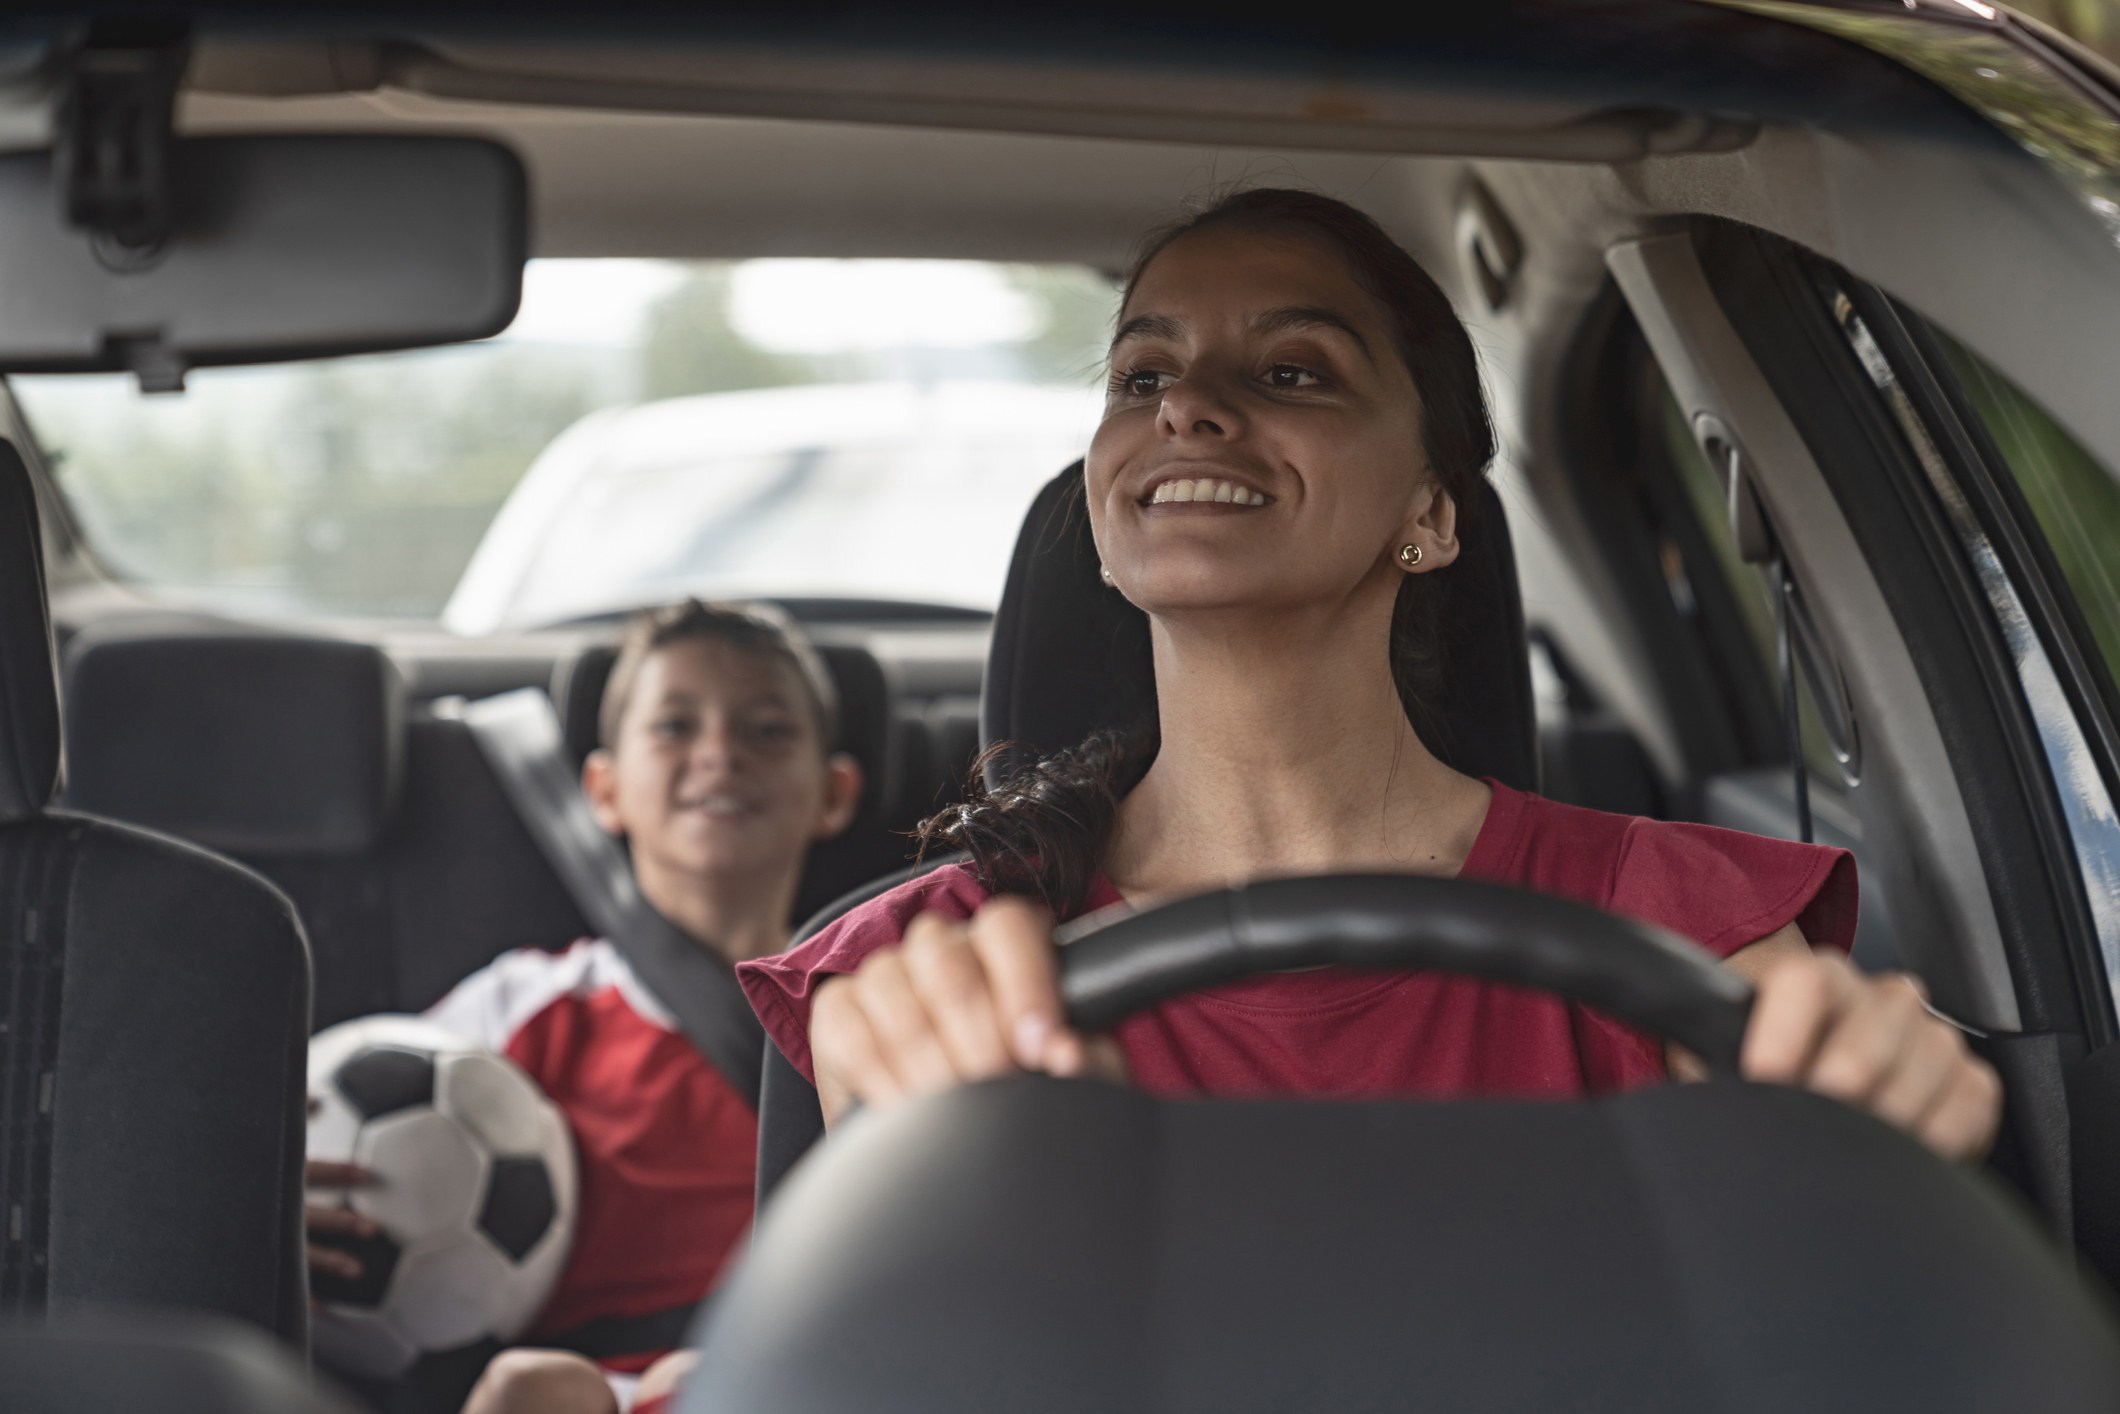 parent smiling at her child holding a soccer ball, in the rear view mirror